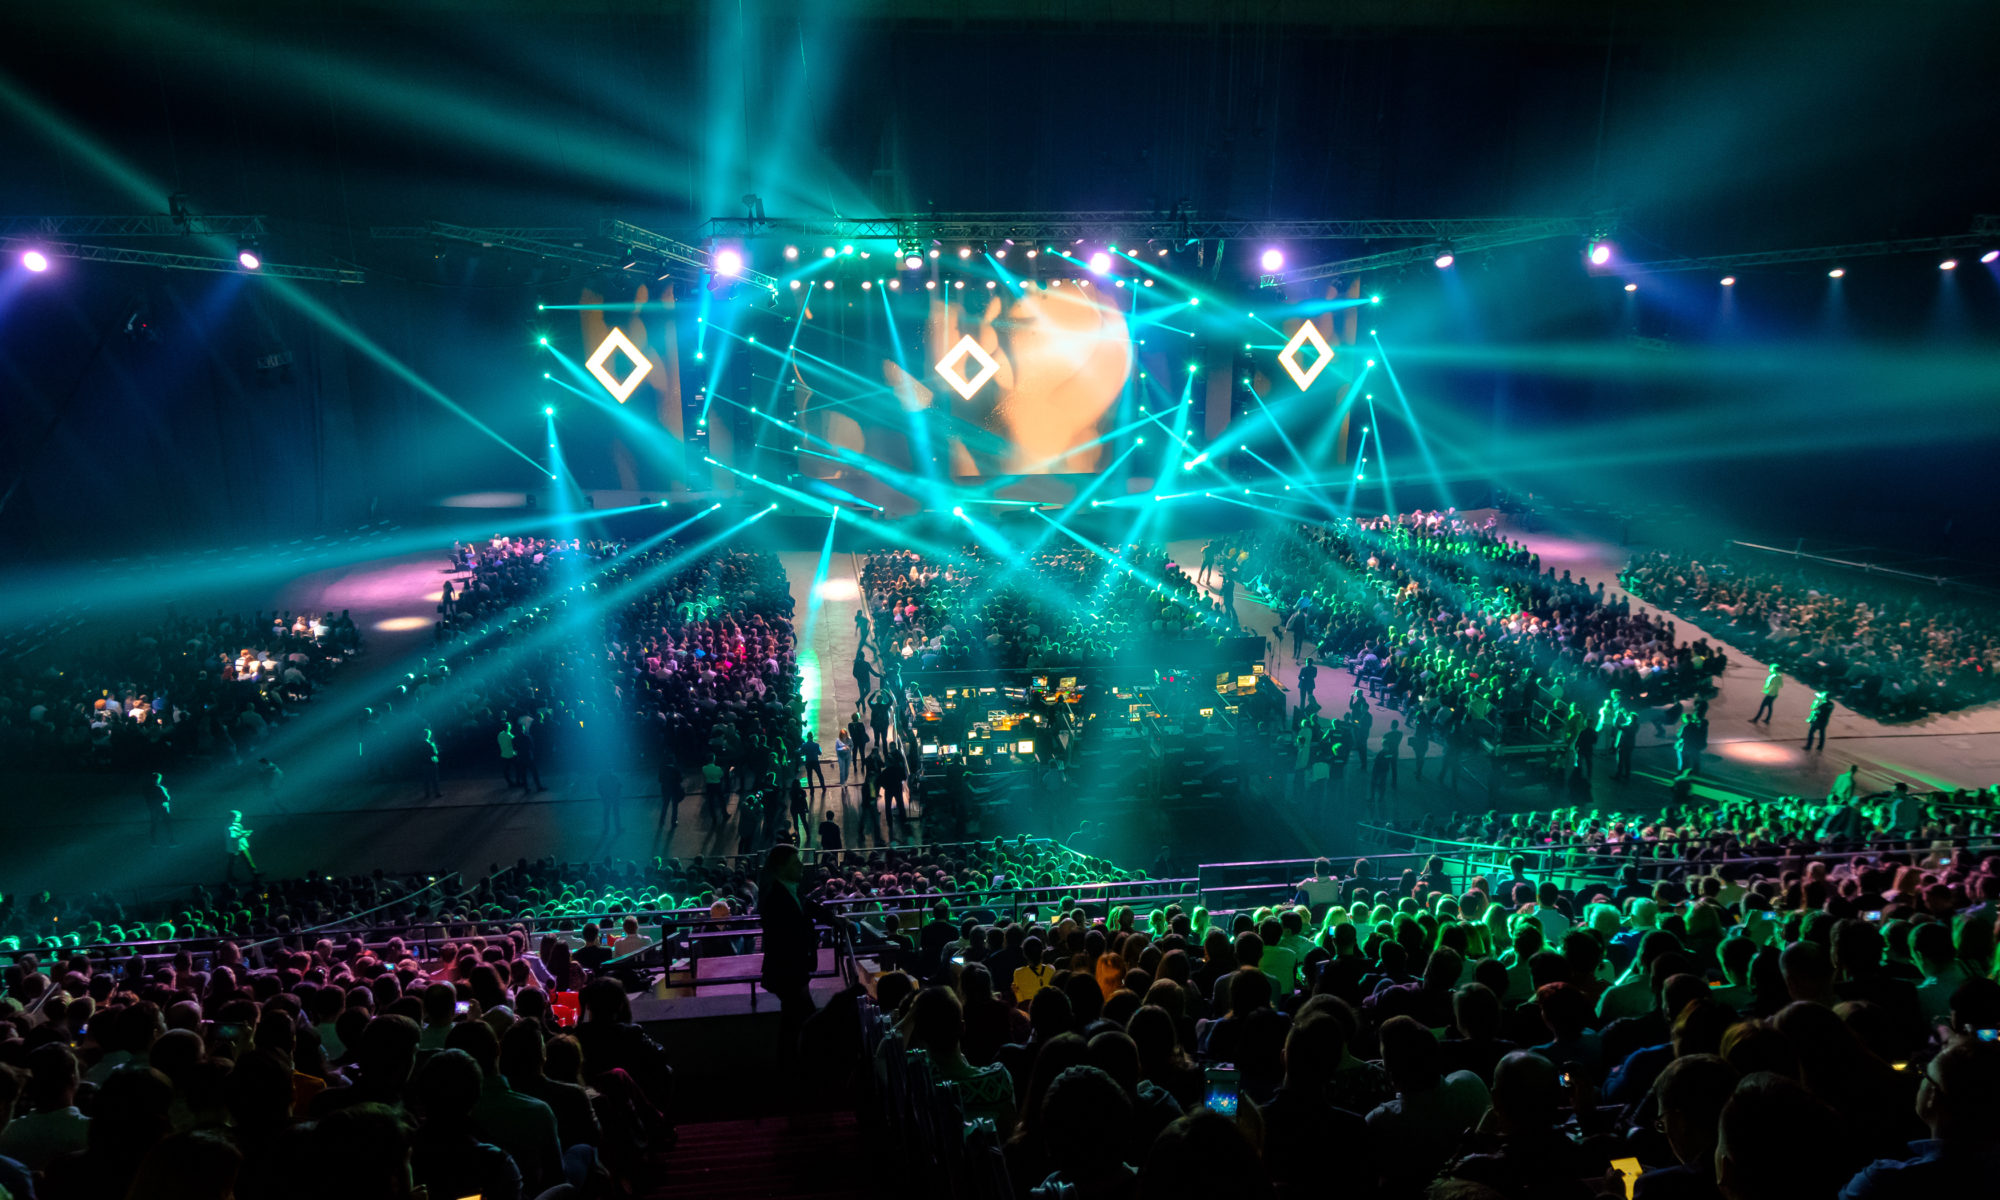 Concert Promotions: The Right Strategy